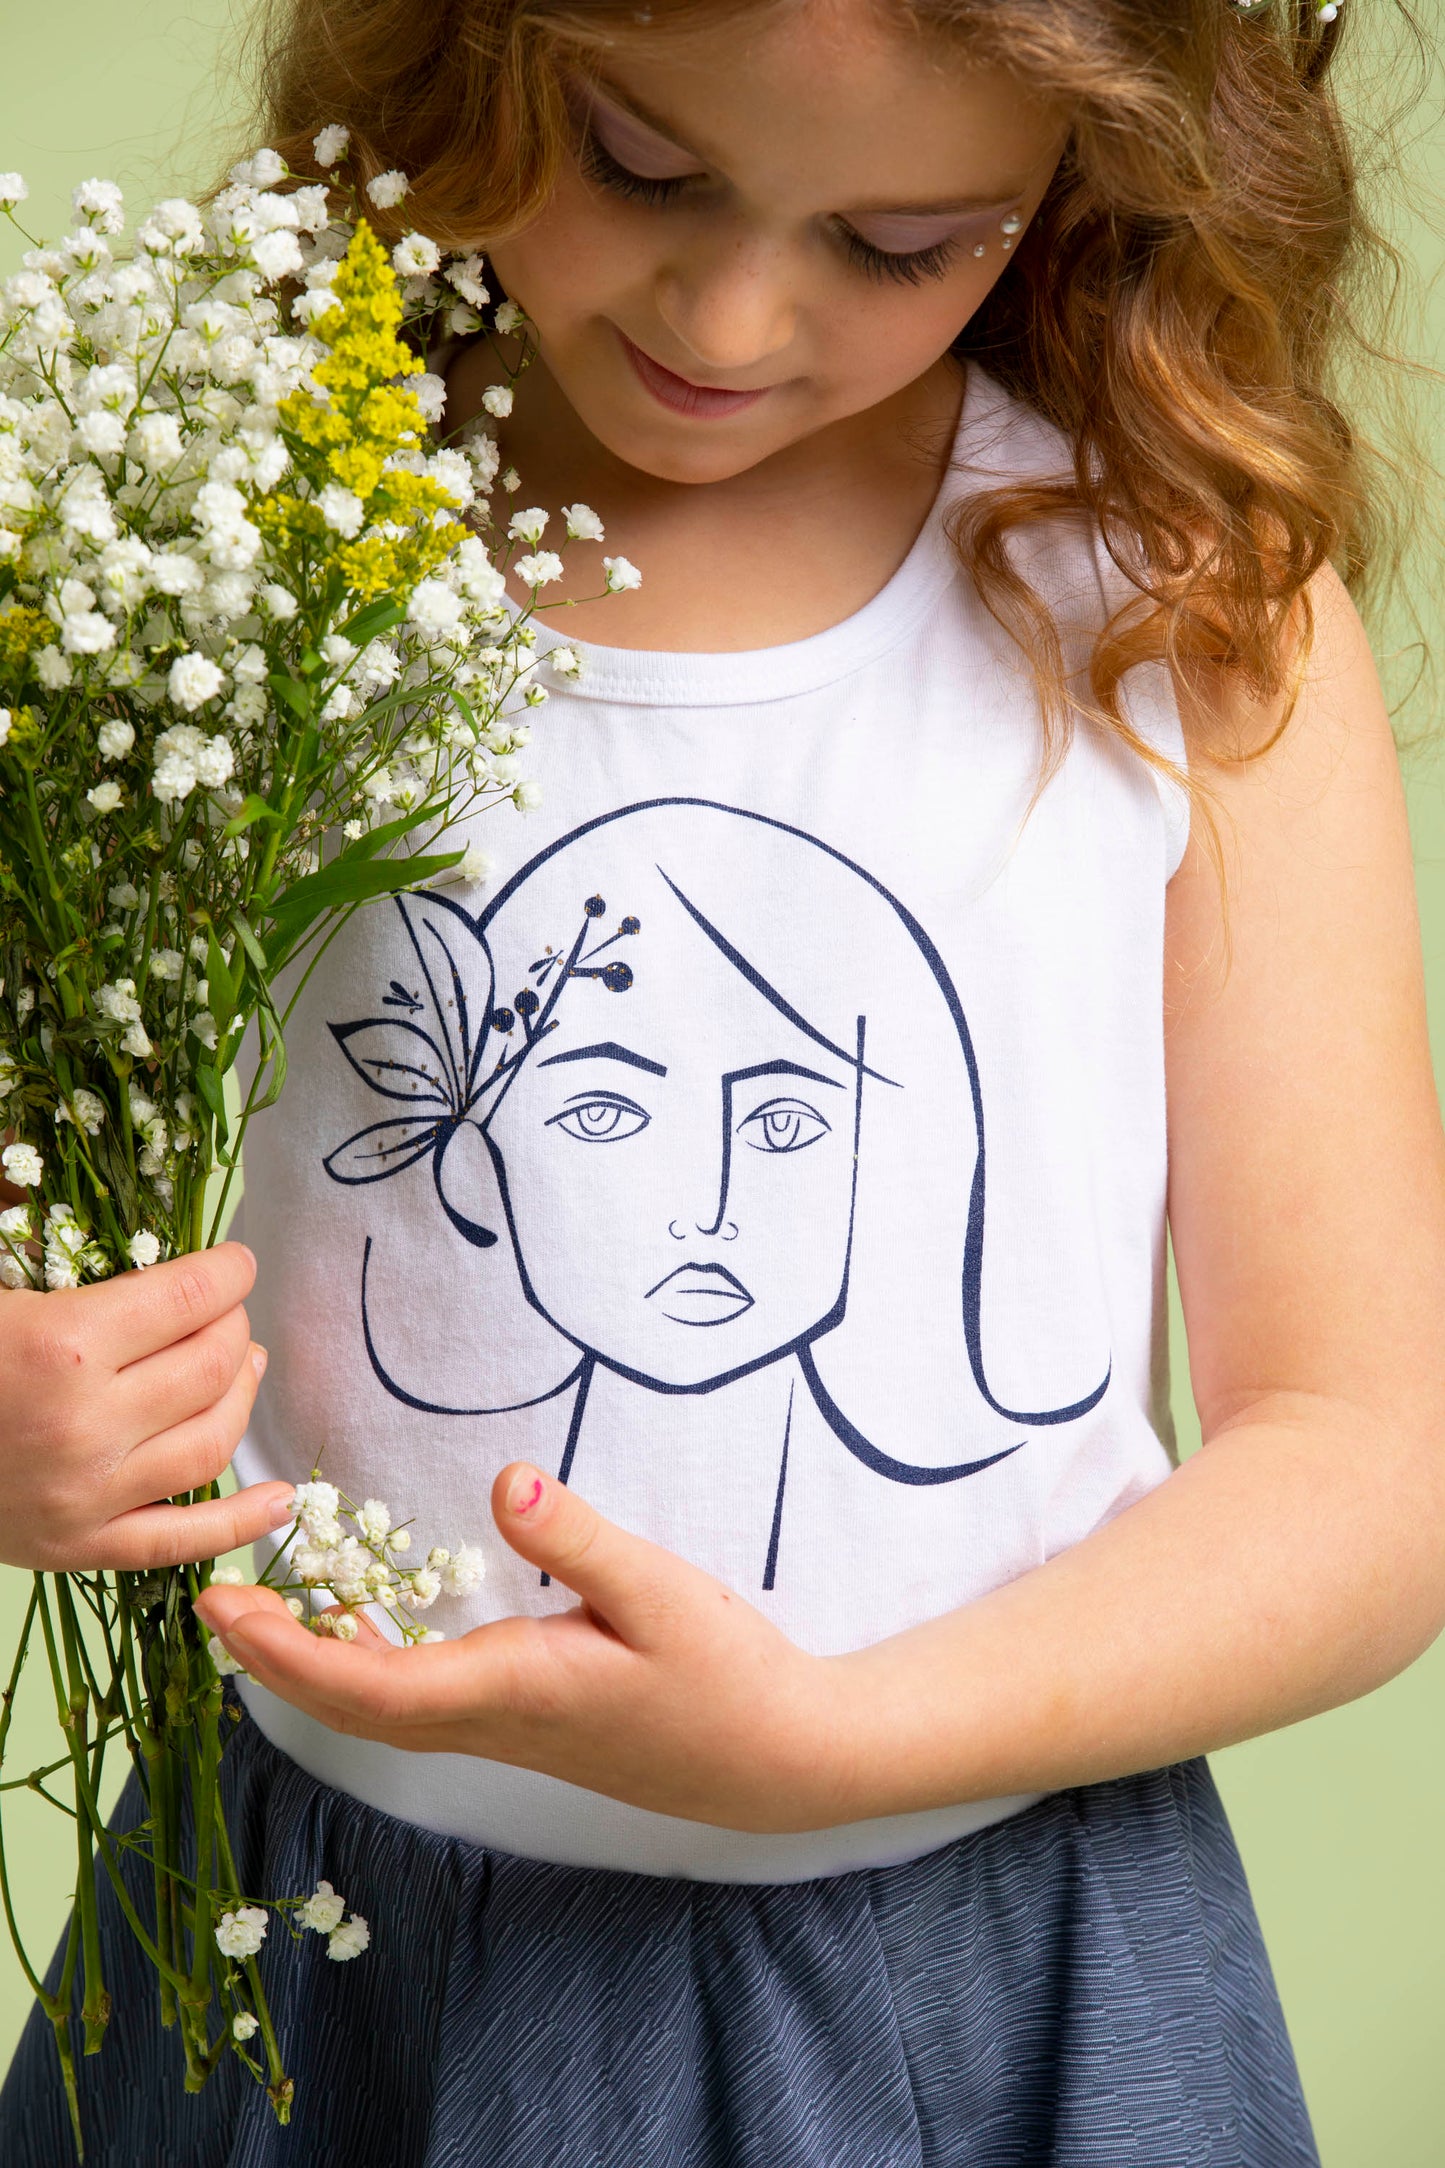 Close up of the Ofelia print on the Ofelia Top that the young girl is wearing while holding flowers.